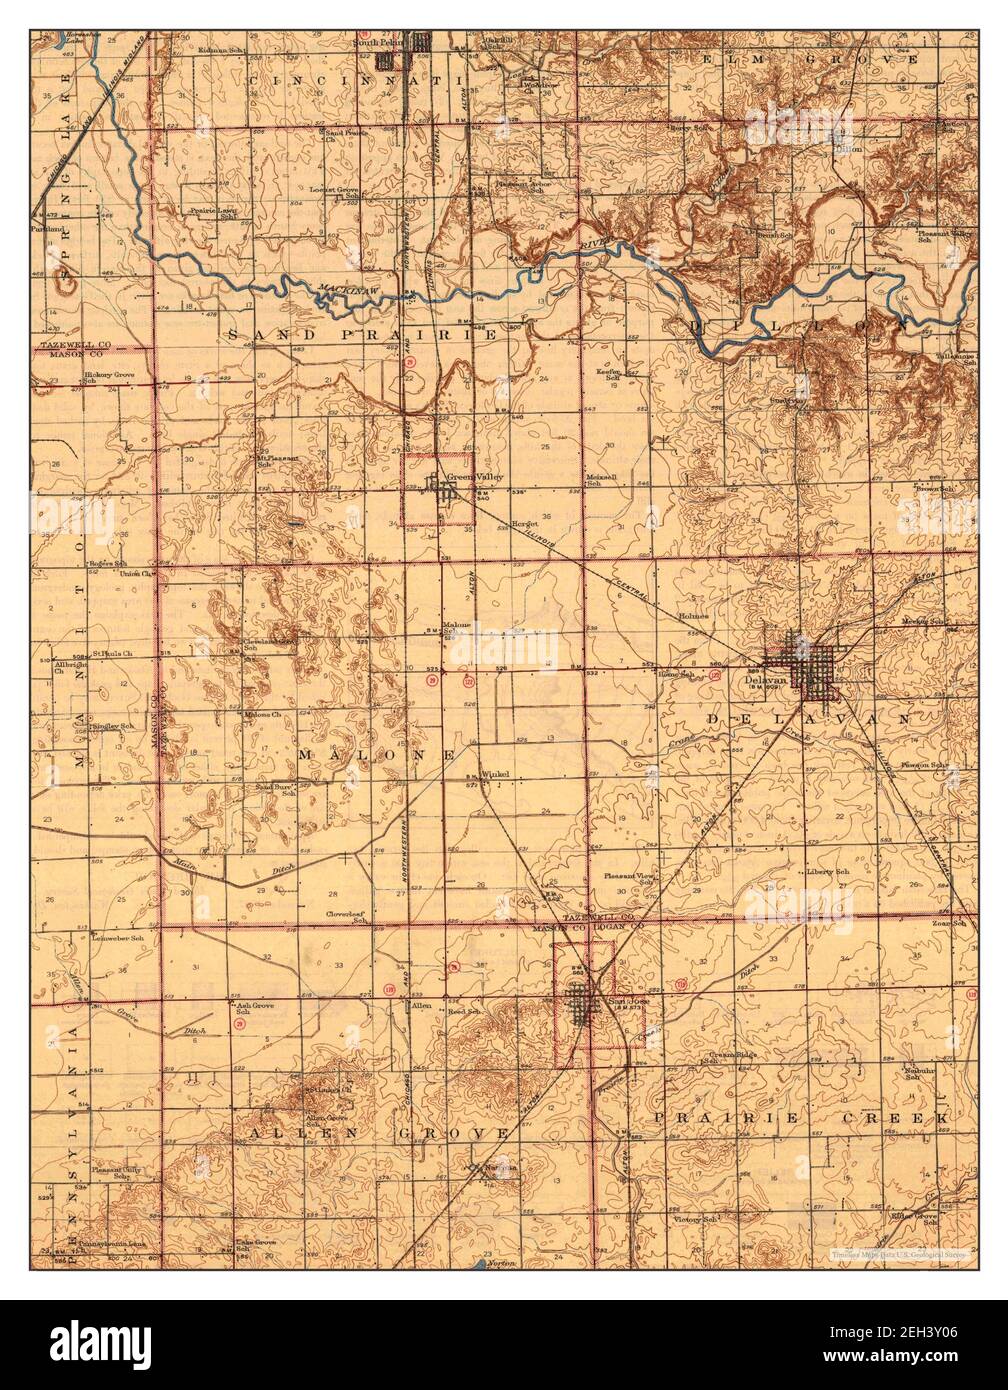 Delavan, Illinois, map 1942, 1:62500, United States of America by Timeless Maps, data U.S. Geological Survey Stock Photo